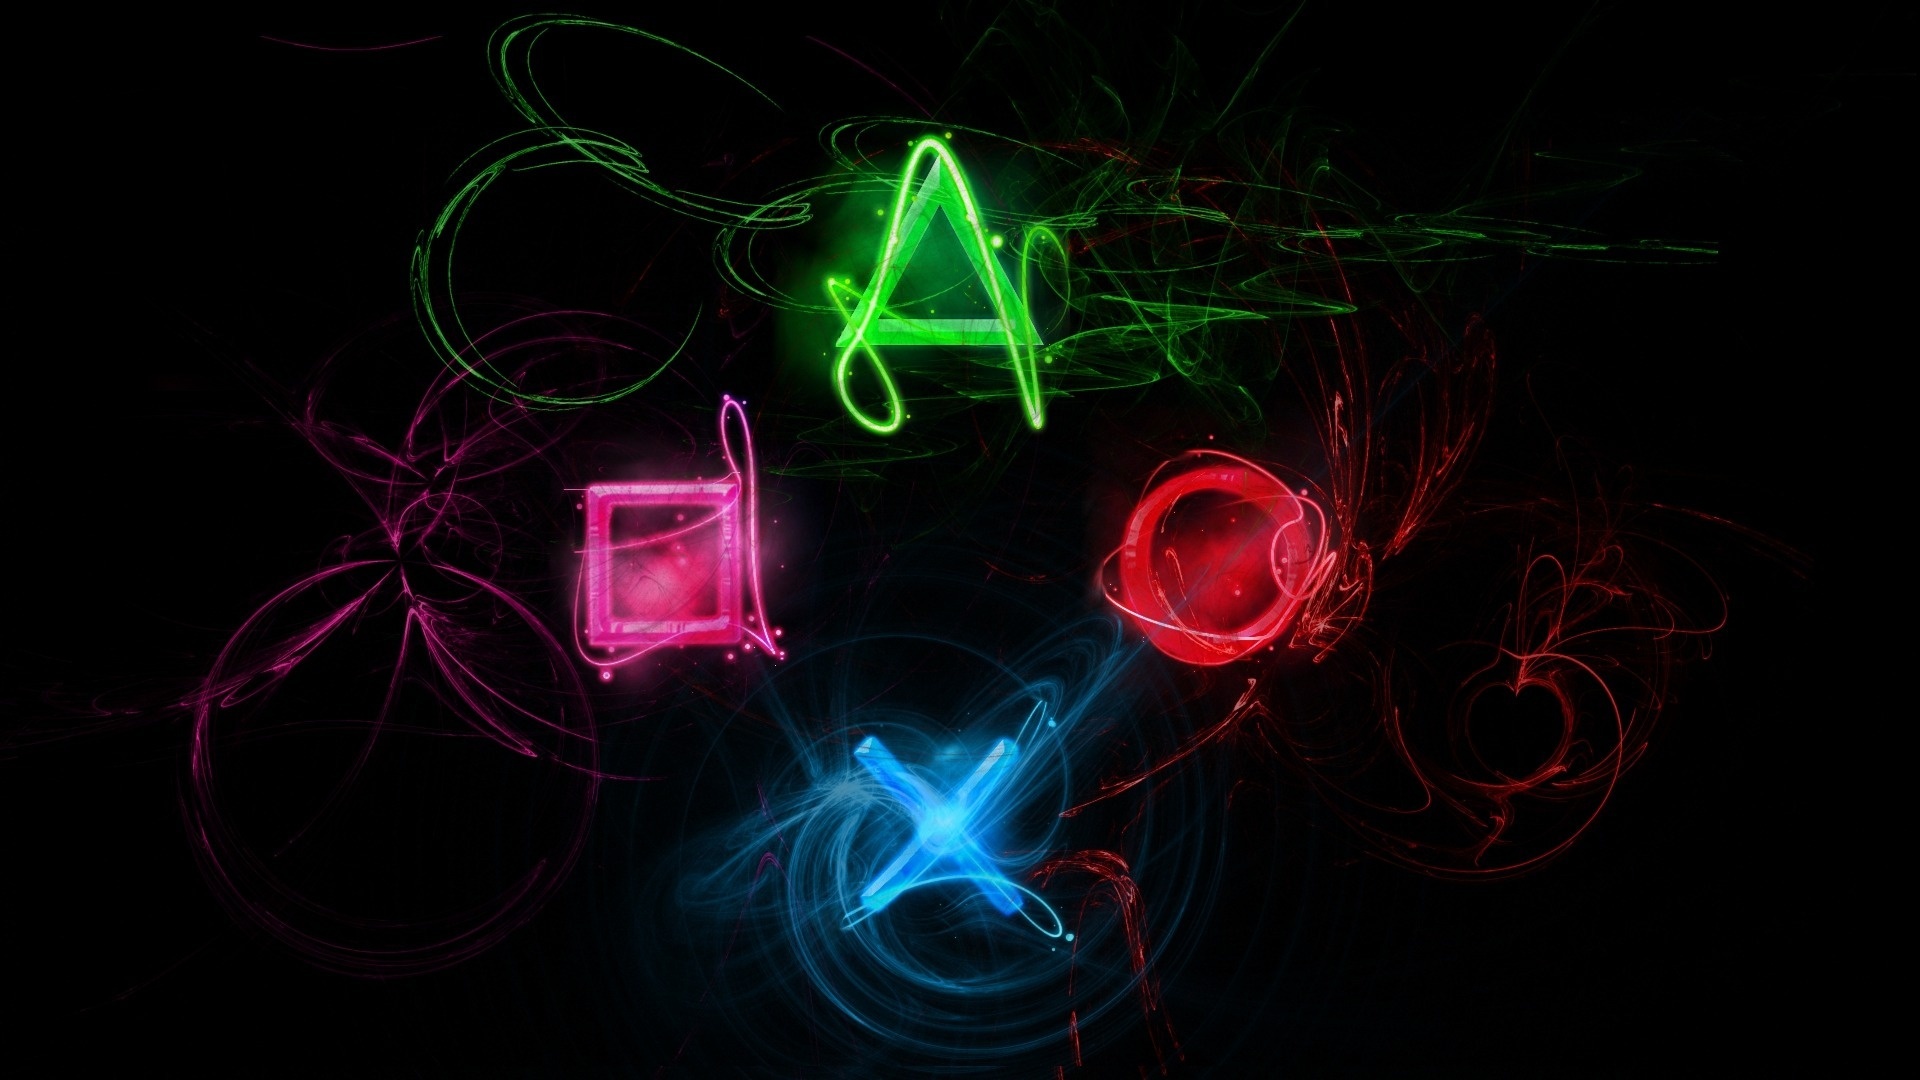 Ps3 Backgrounds Wallpapers, Backgrounds, Images, Art Photos